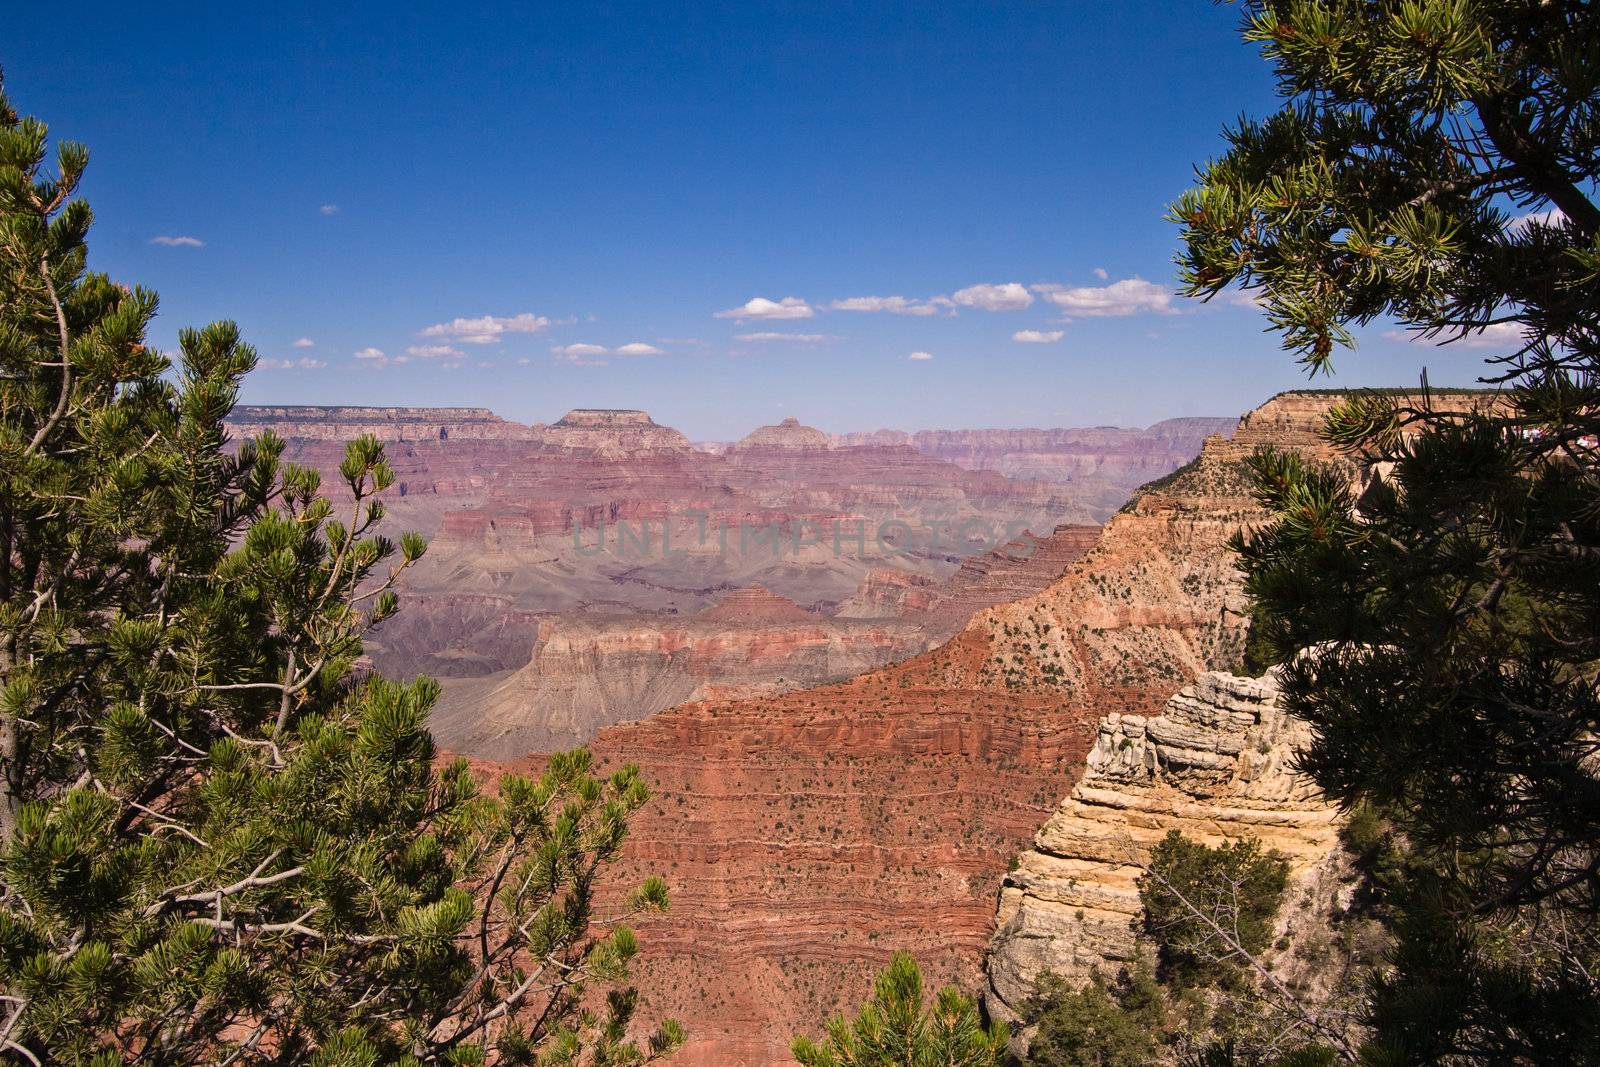 Overview of a Grand Canyon valley framed by trees